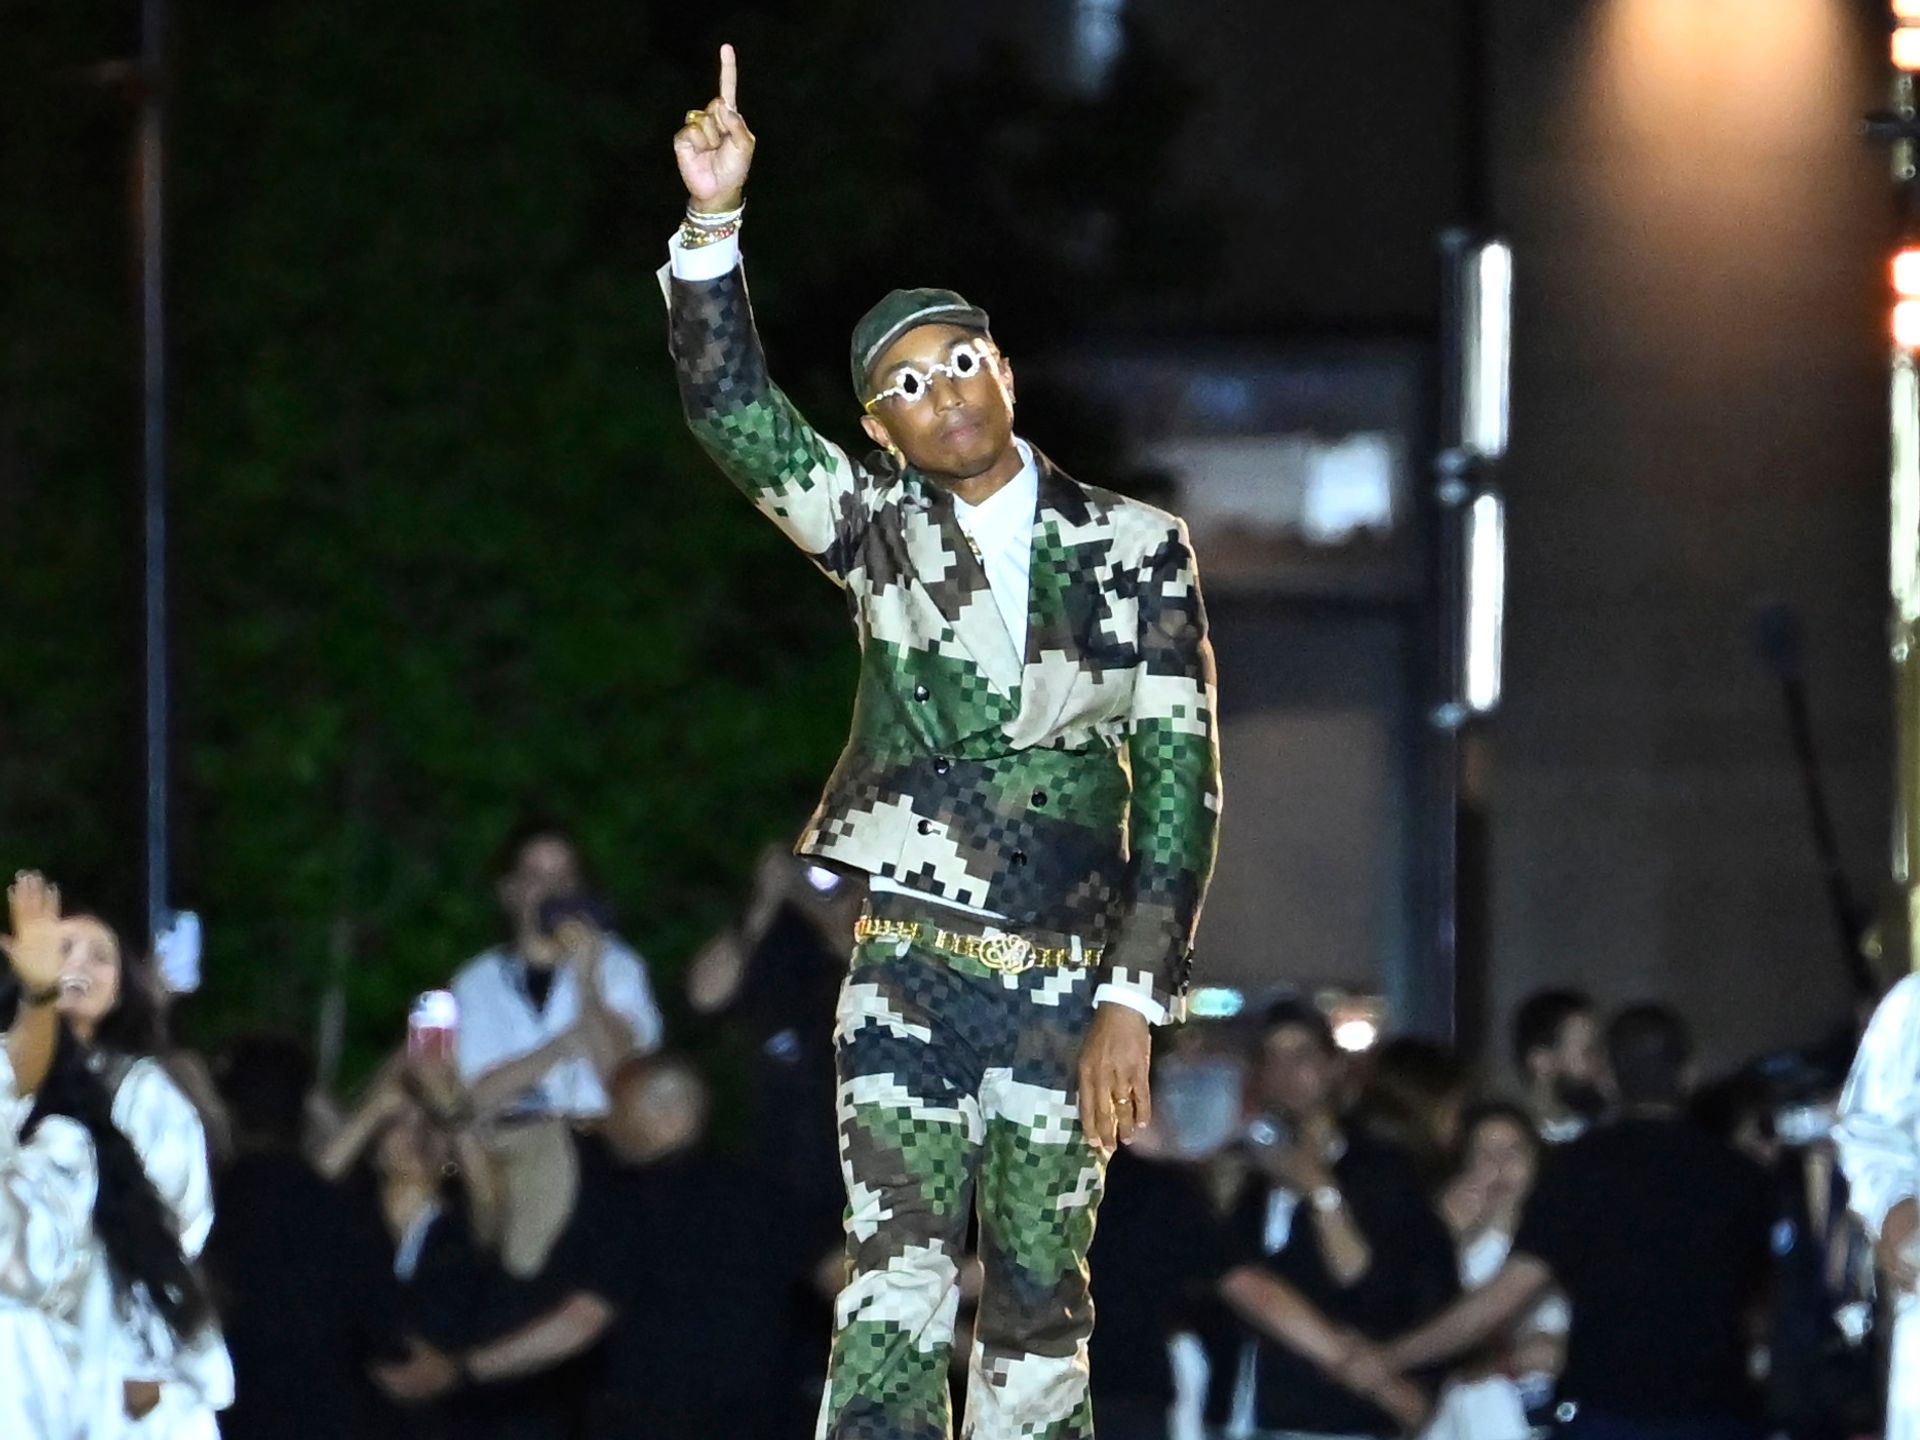 Jay-Z's Louis Vuitton sunglasses are summer perfection